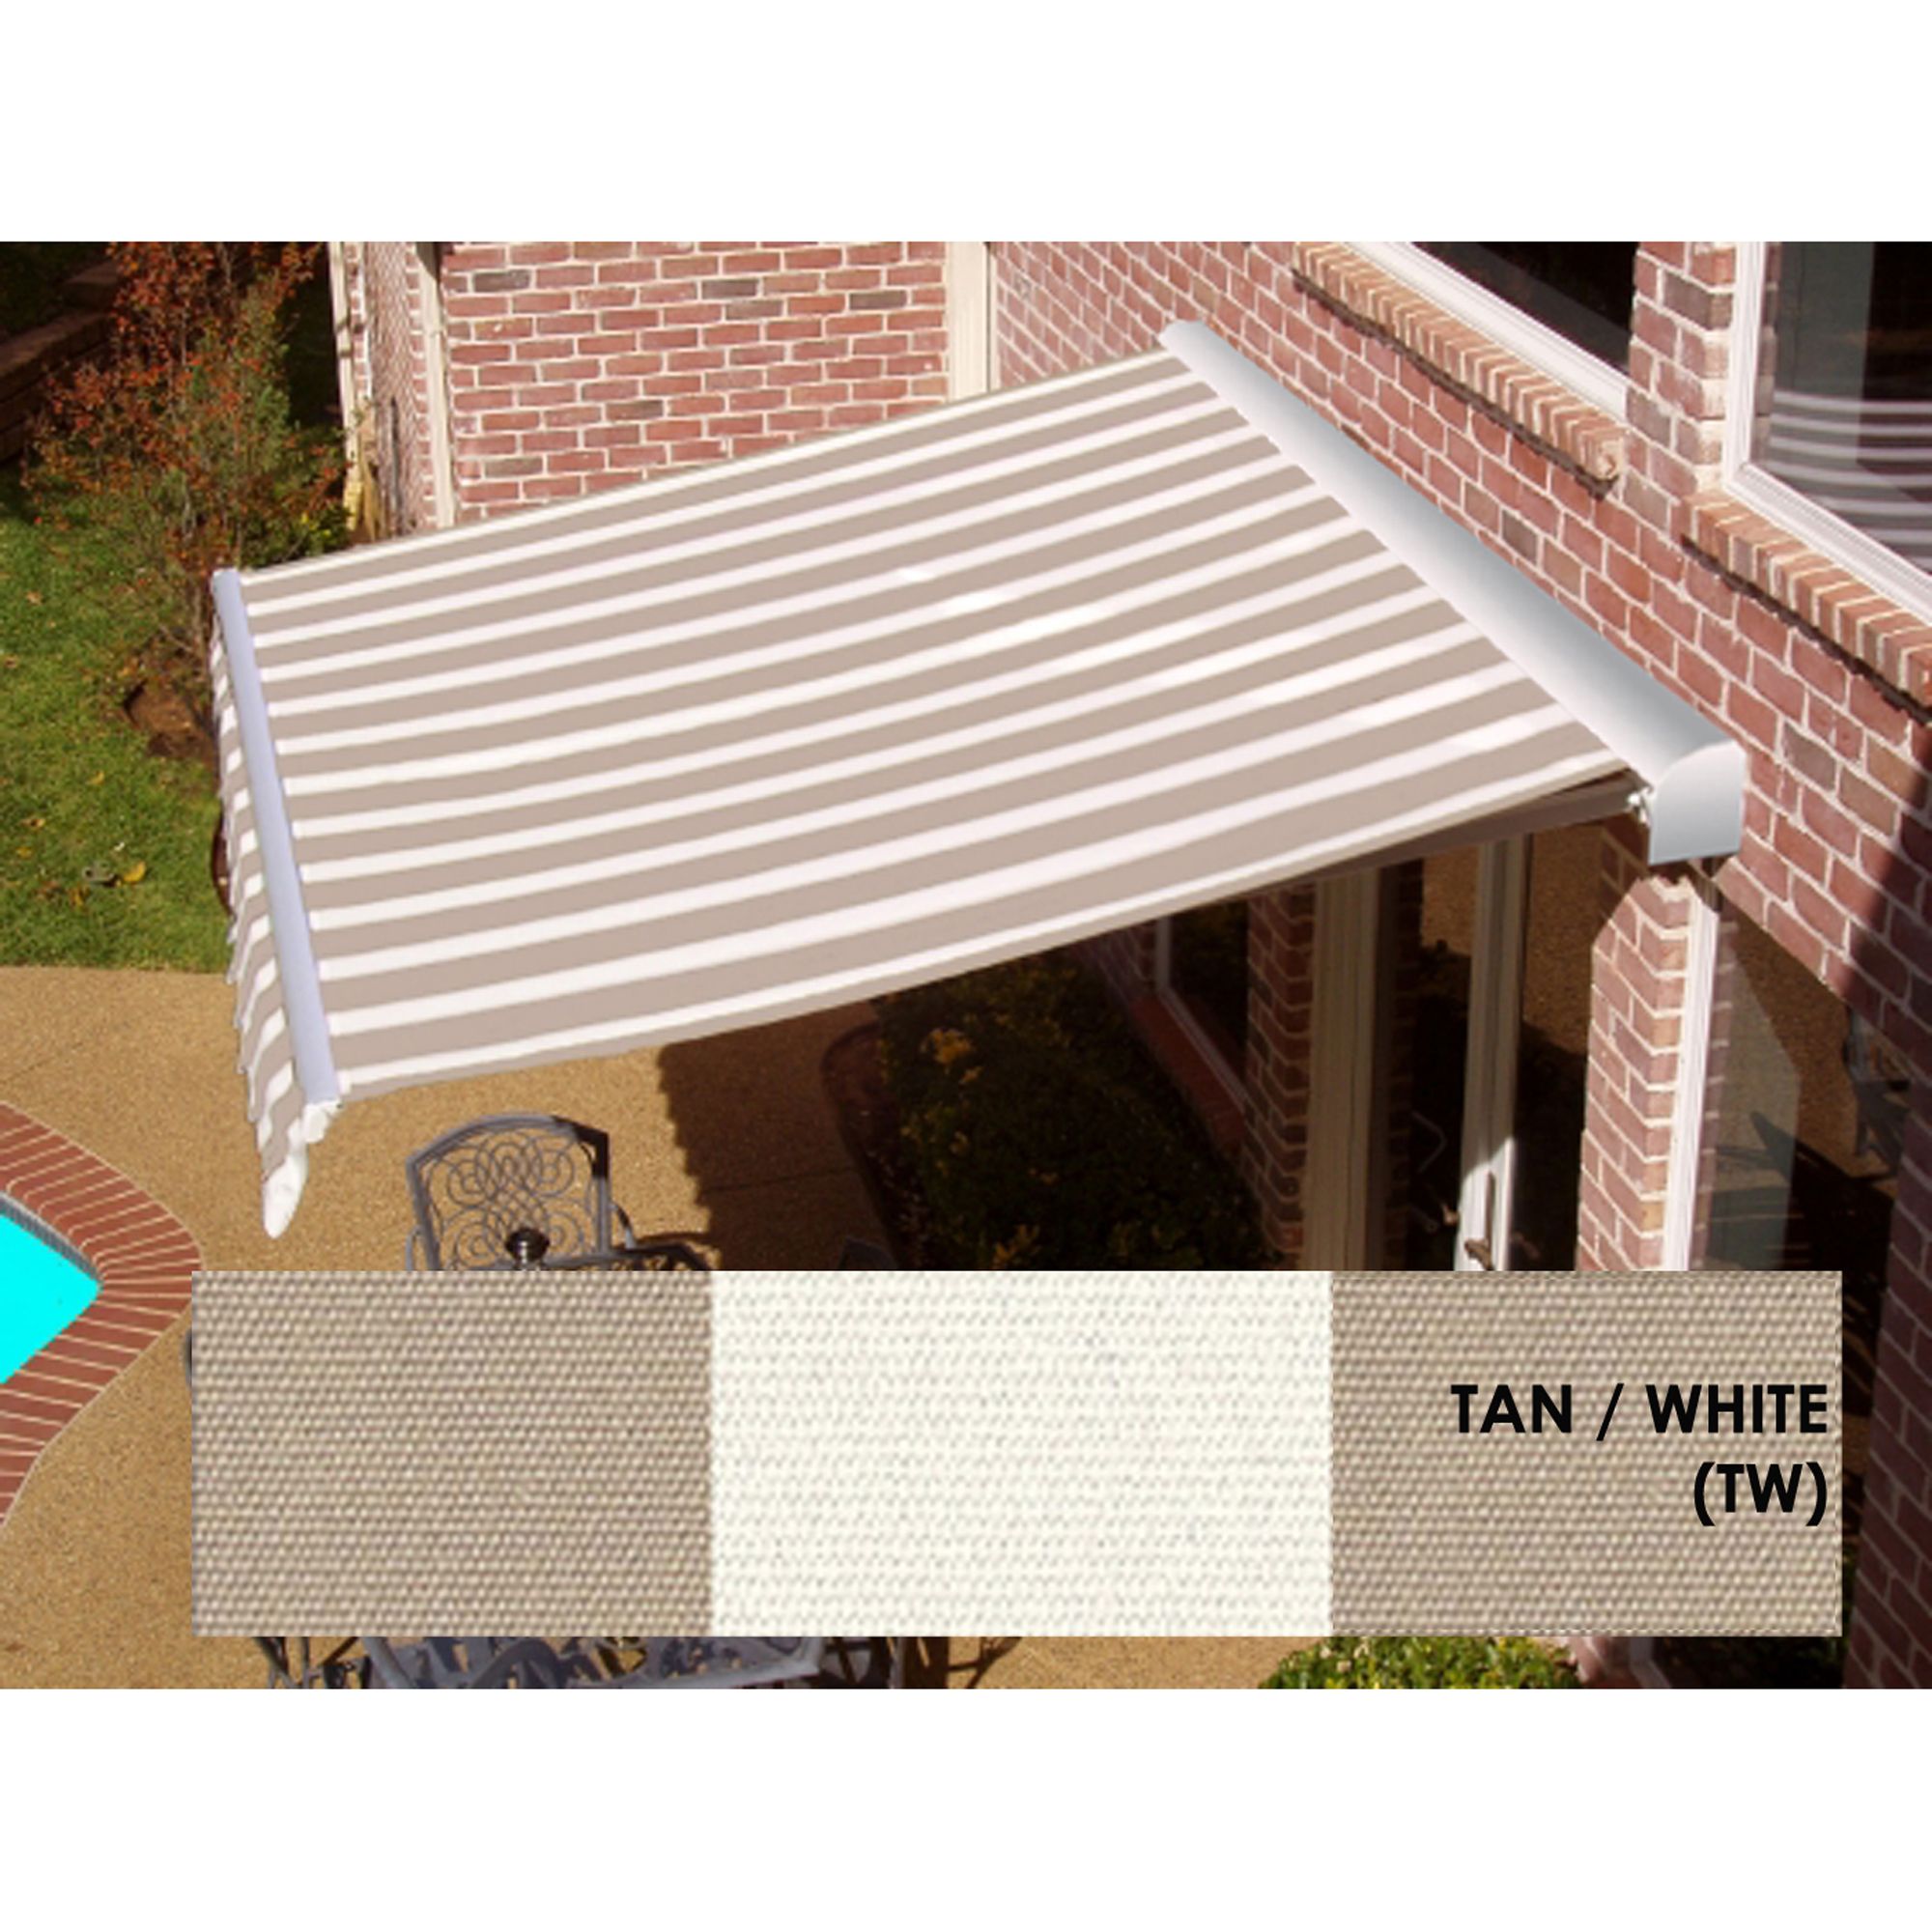 DESTIN&#174; LX Manual Retractable Awning  with Hood - Tan/White